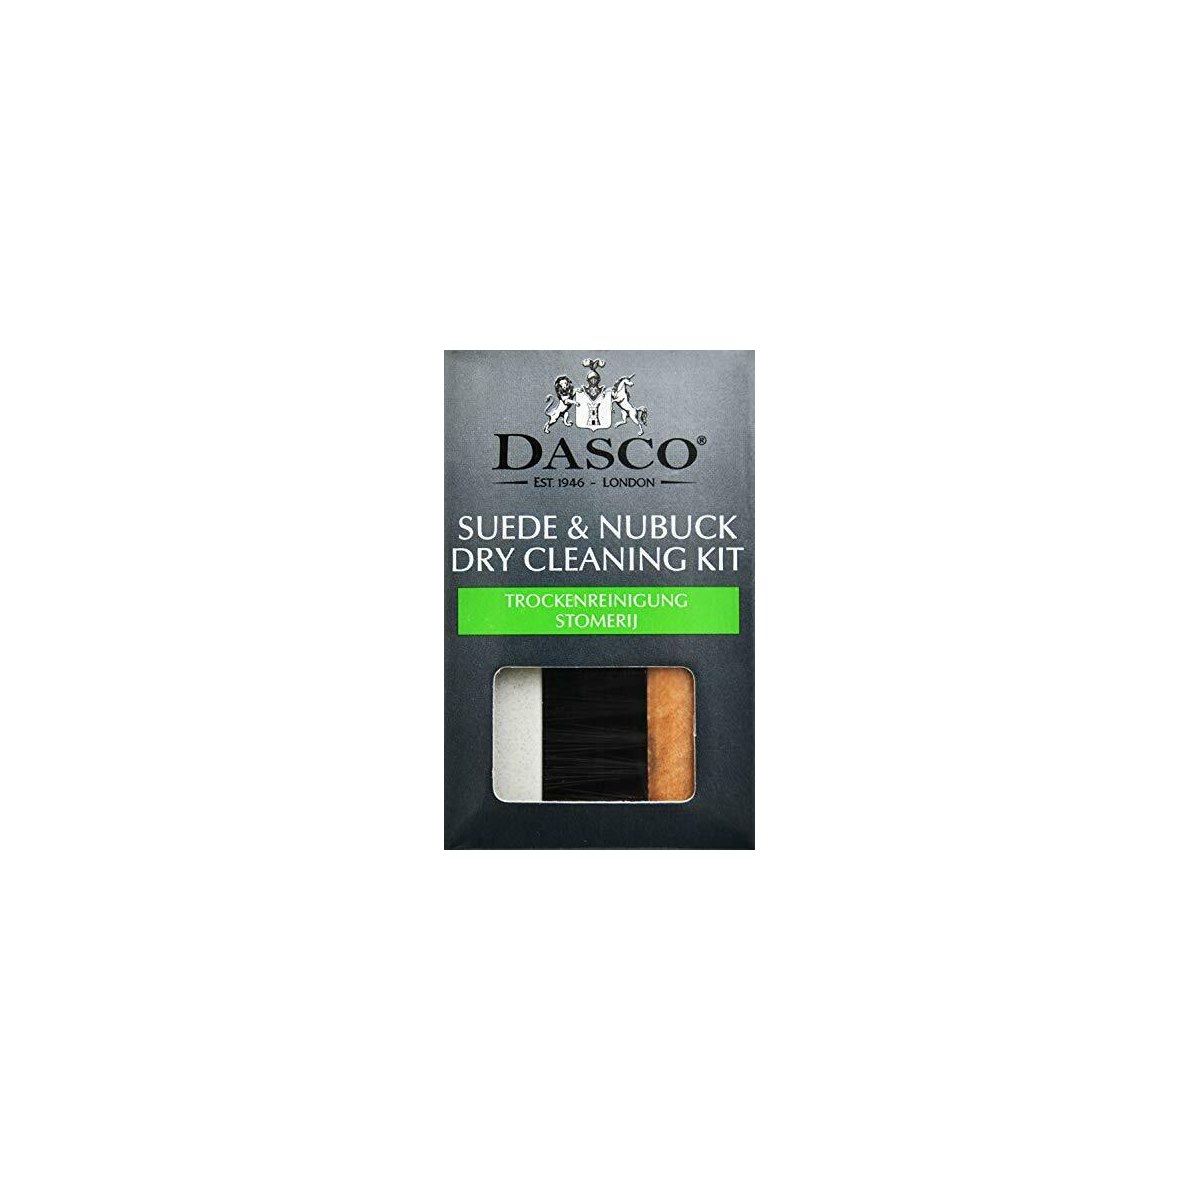 Dasco Dry Cleaning Kit for Suede and Nubuck